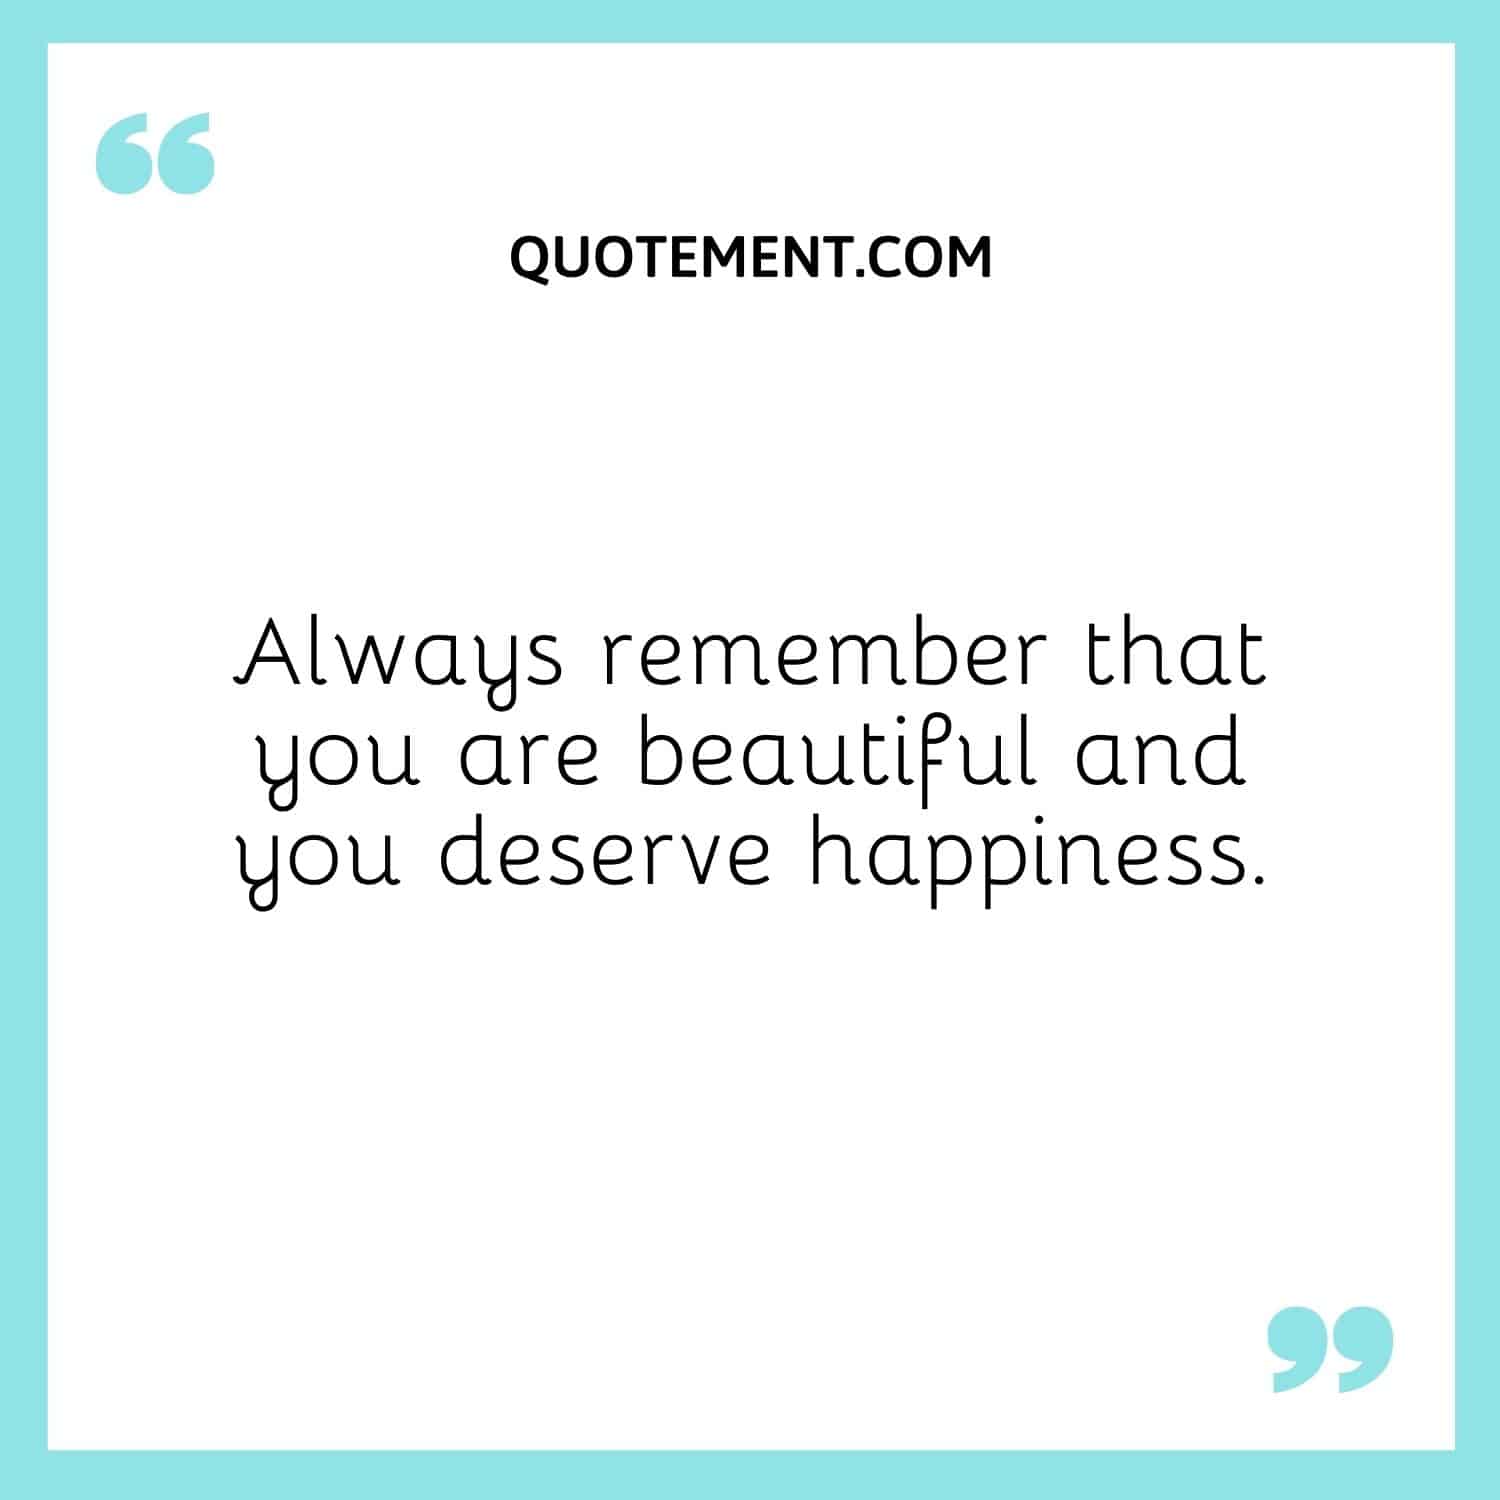 Always remember that you are beautiful and you deserve happiness.